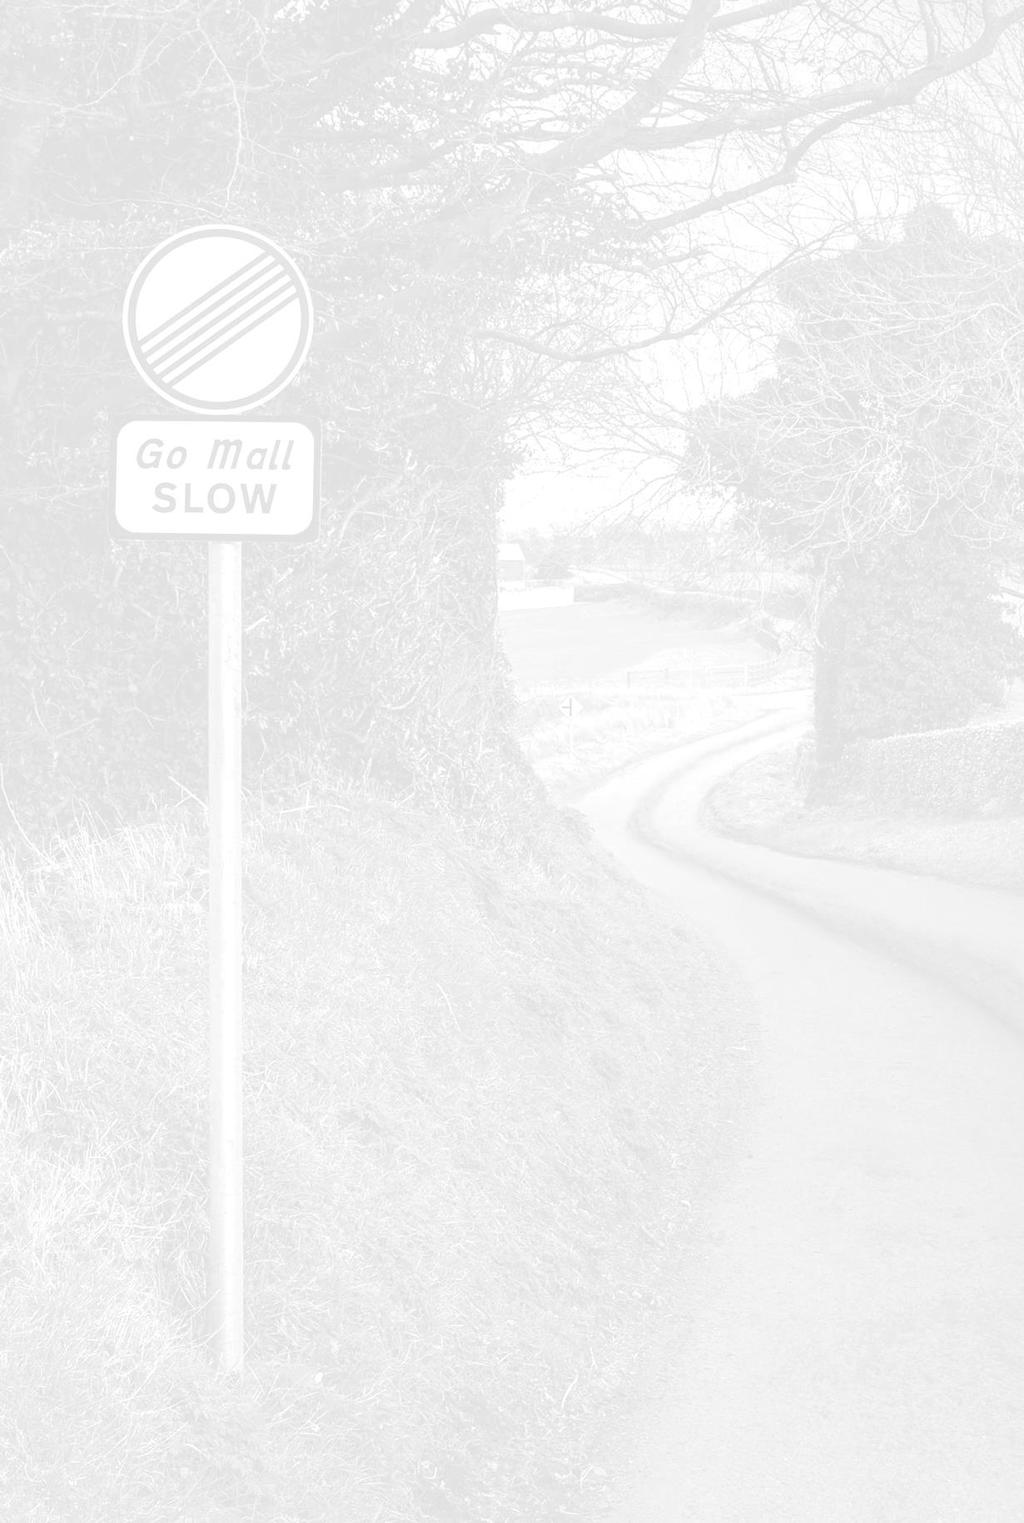 EXECUTIVE SUMMARY PURPOSE The purpose of this advice note is to provide guidance to Local Authority staff in the use/employment of the Rural Speed Limit Sign.